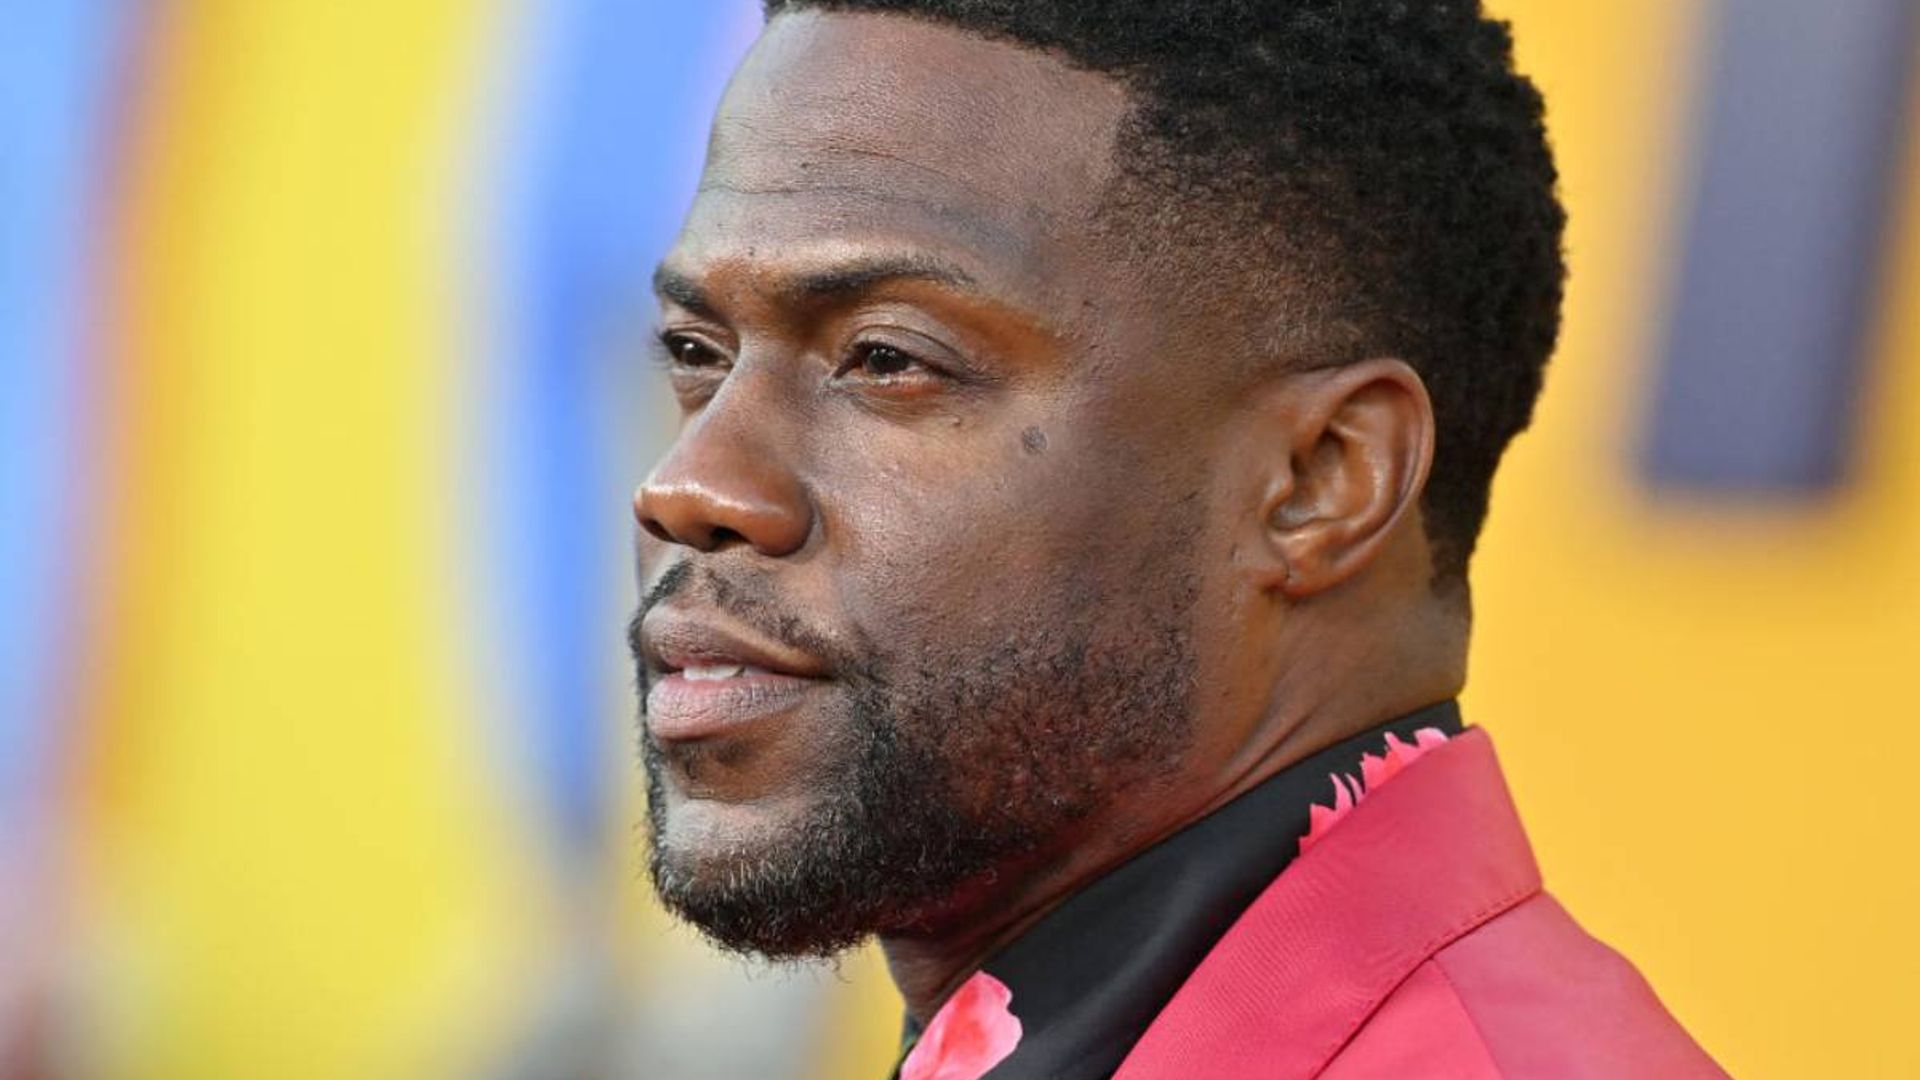 Kevin Hart shares devastating news of his father's death alongside family photos